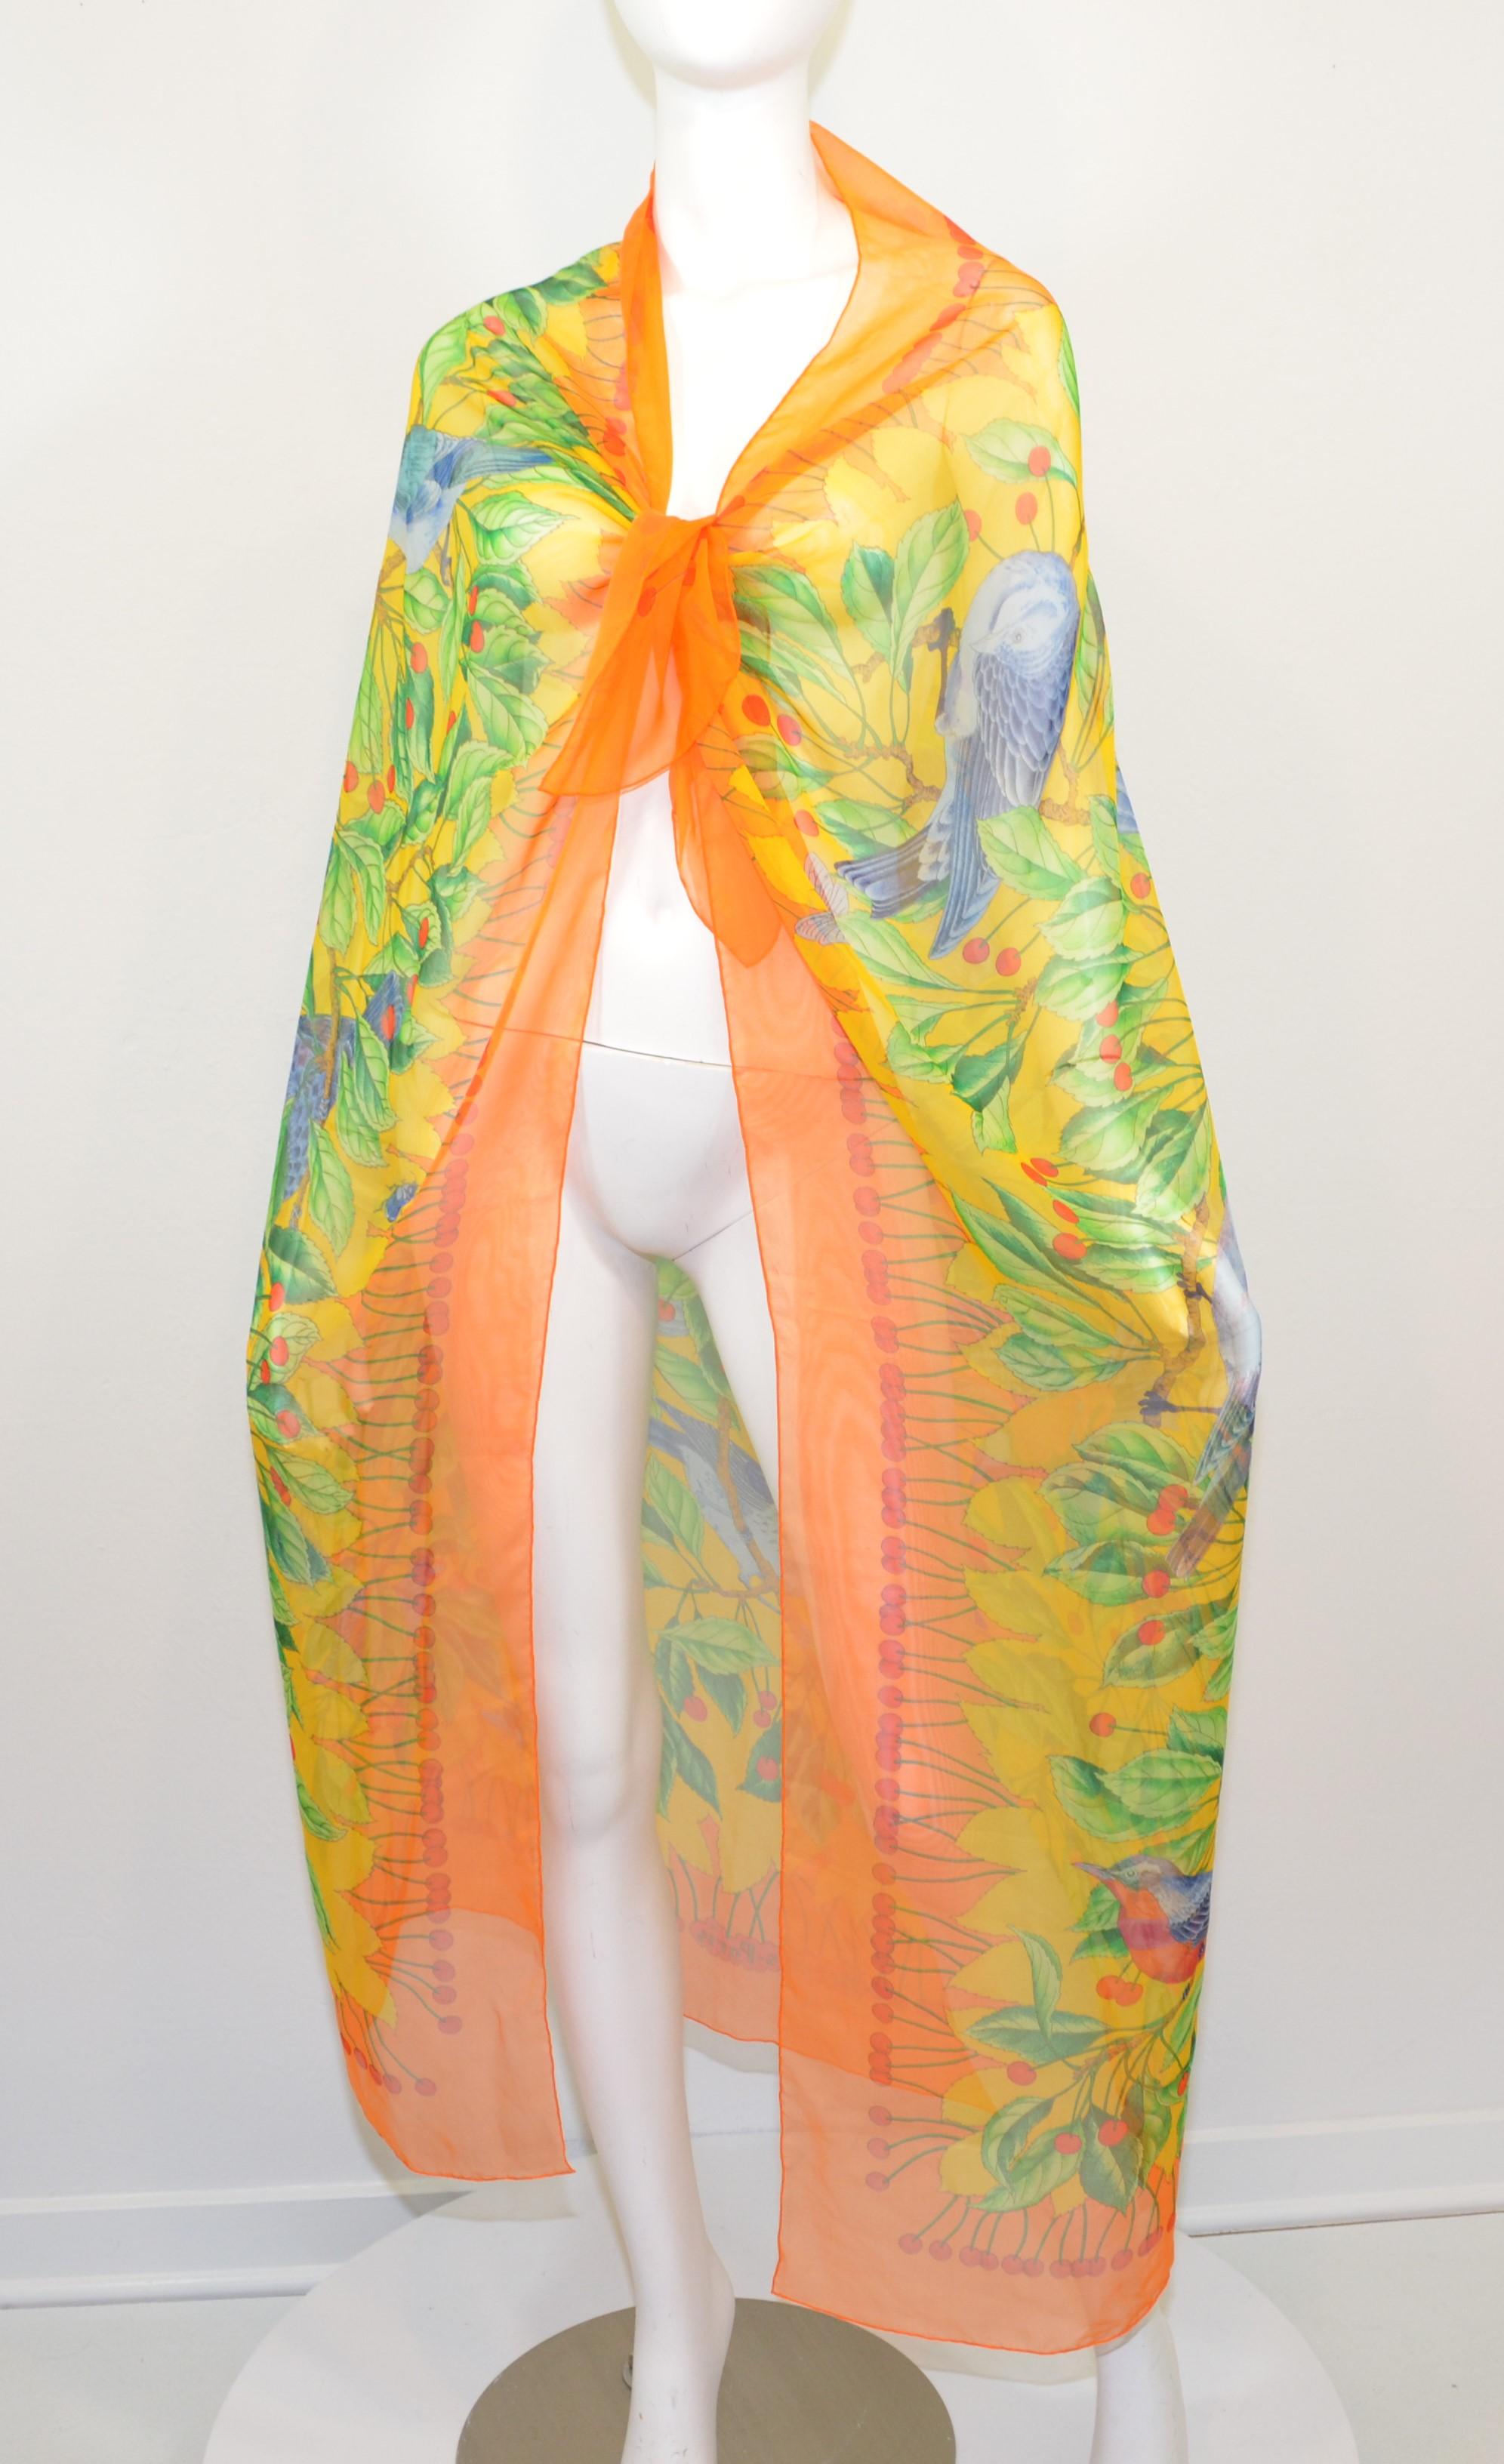 Hermes 140cm xl silk/chiffon scarf featured in orange with a multi-color bird and cherry print throughout with 